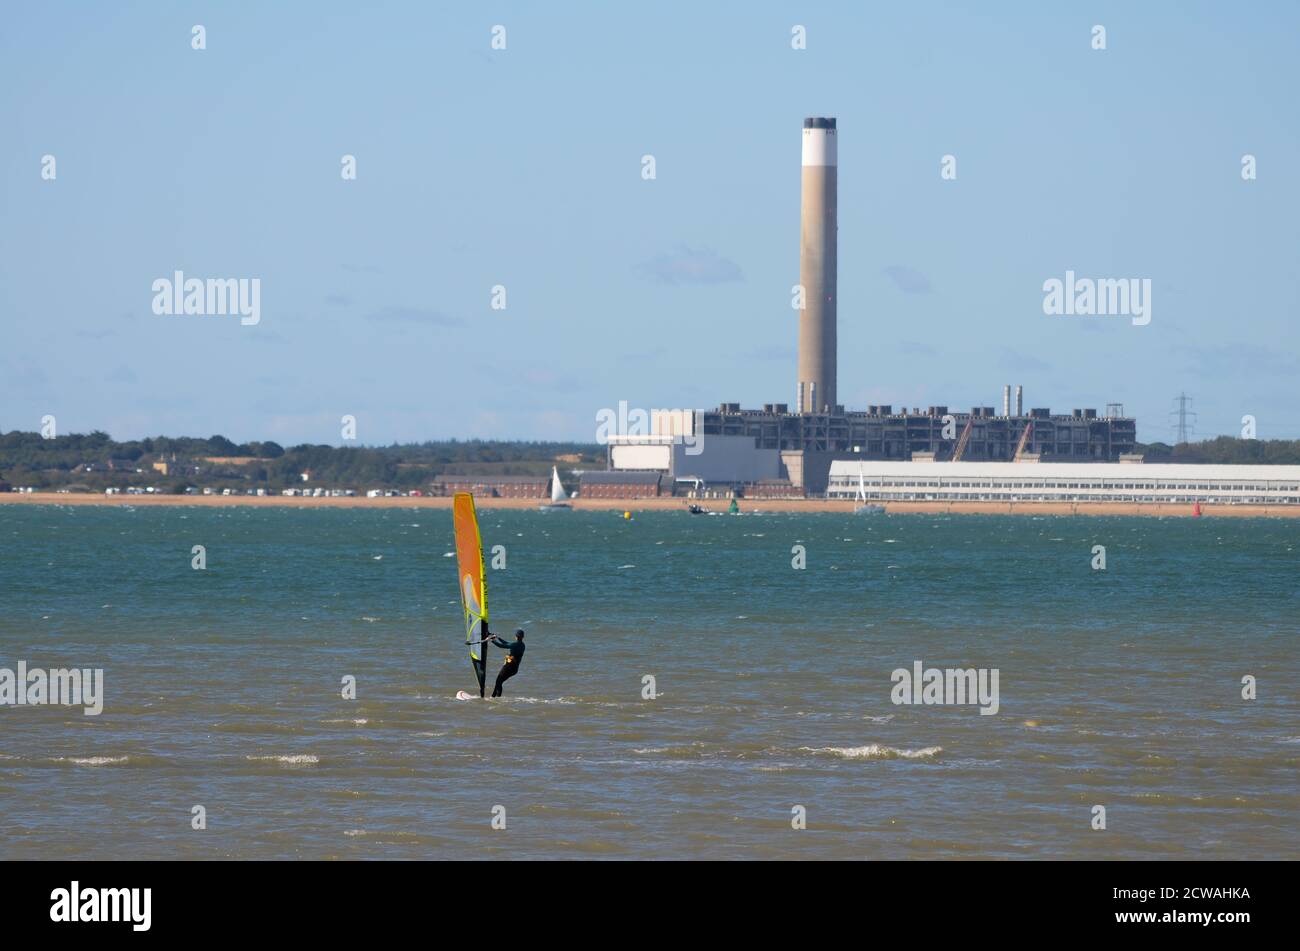 Windsurfer and Fawley power station. The power station in the background is being dismantled, showing the exposed internal structure. Stock Photo